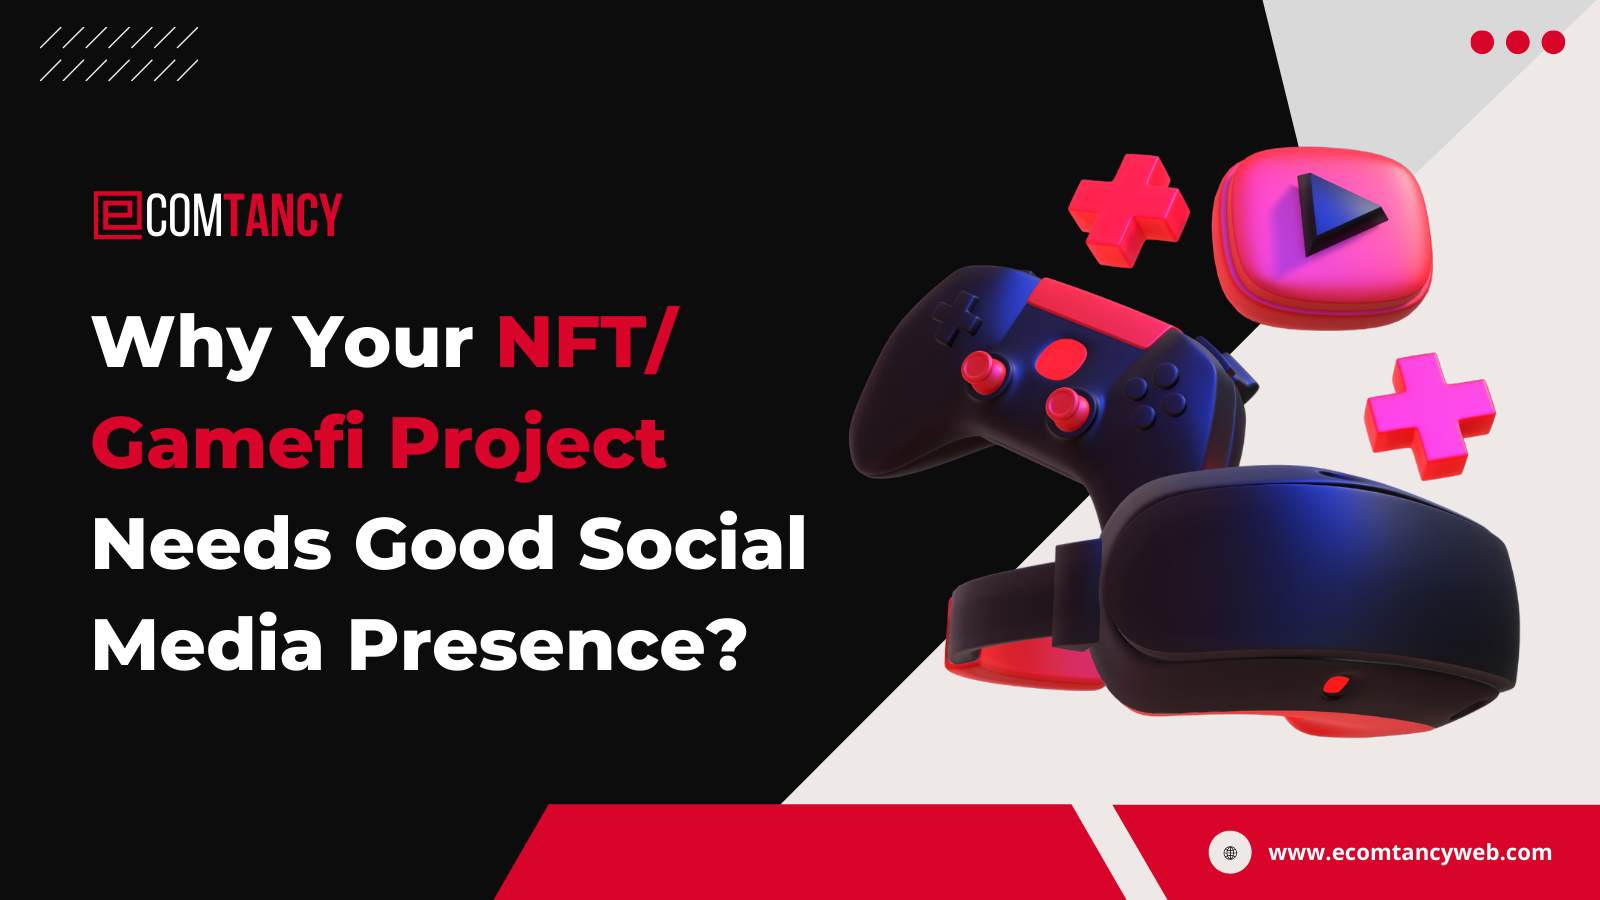 10 Reasons Why Your NFT/ Gamefi Project Needs Good Social Media Presence